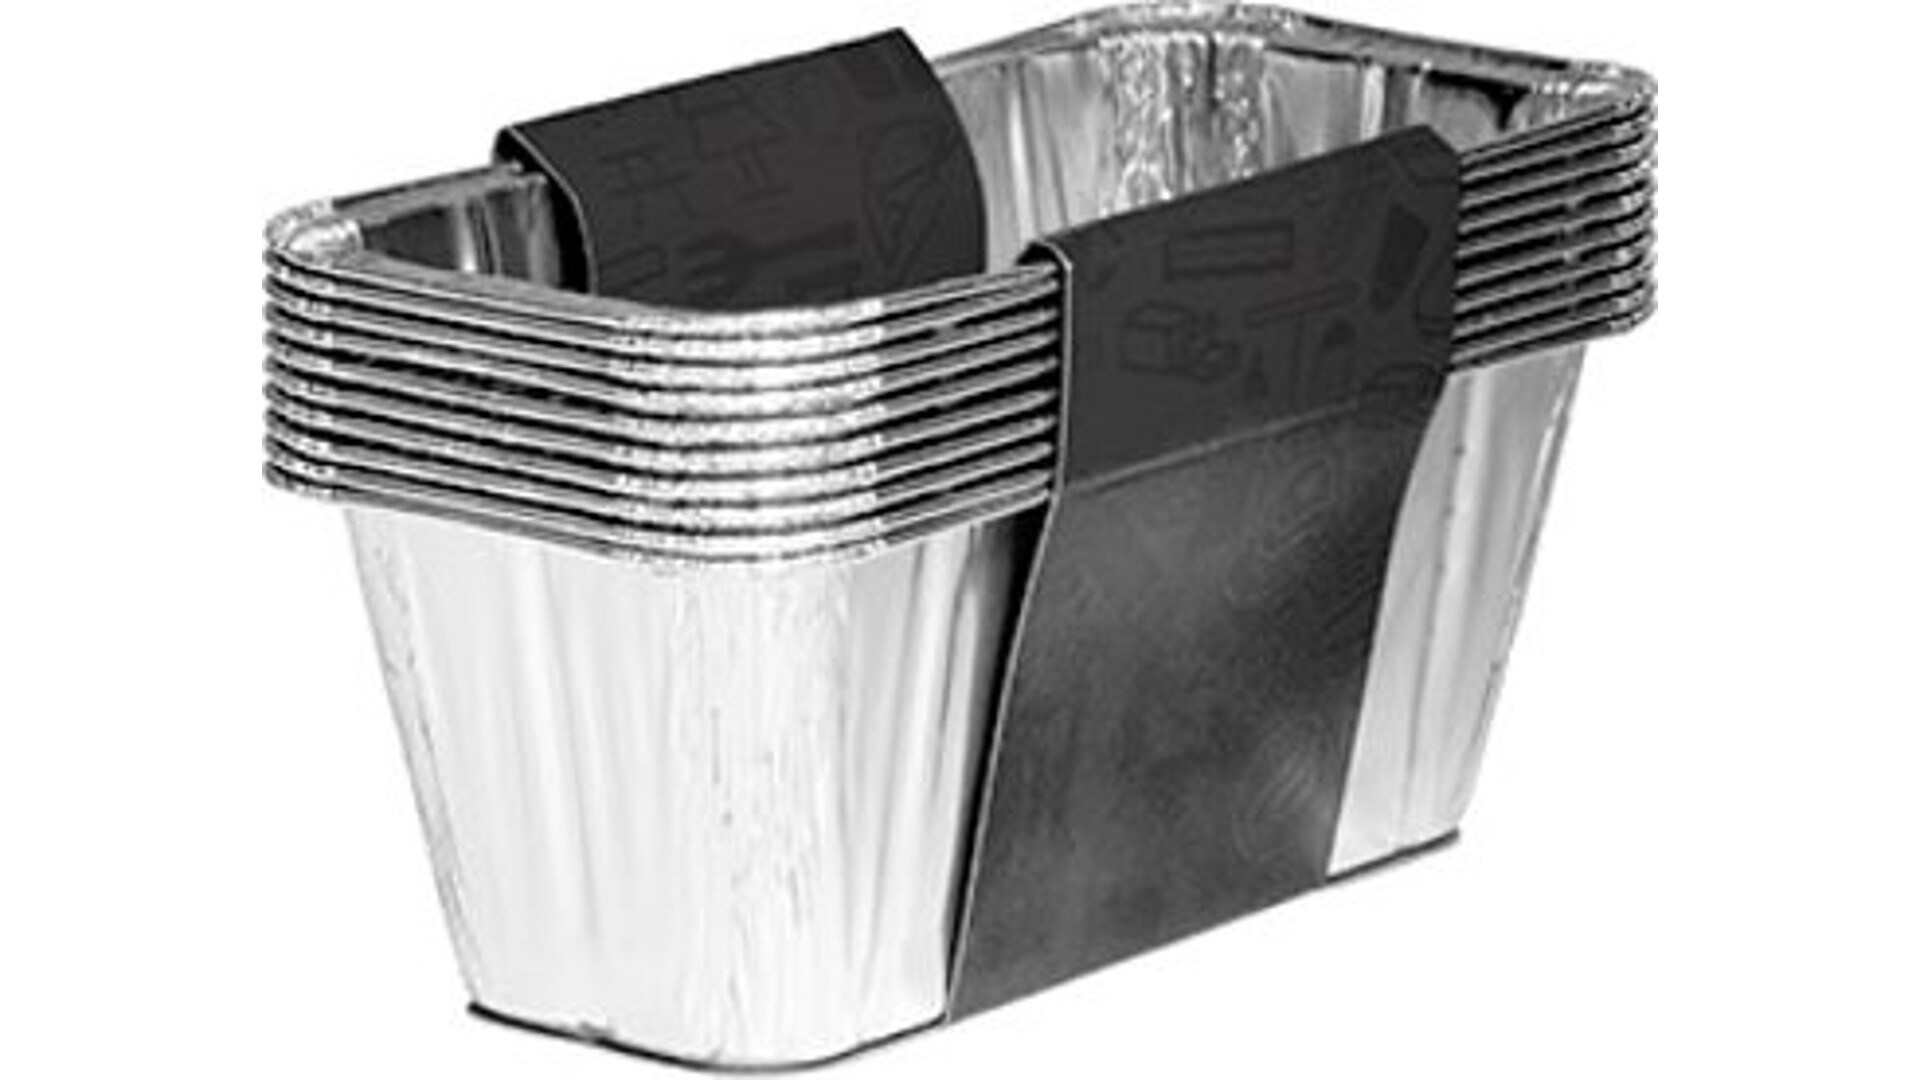 Firsgrill Foil Tray Grease Cup Liners for Blackstone Grills 20 